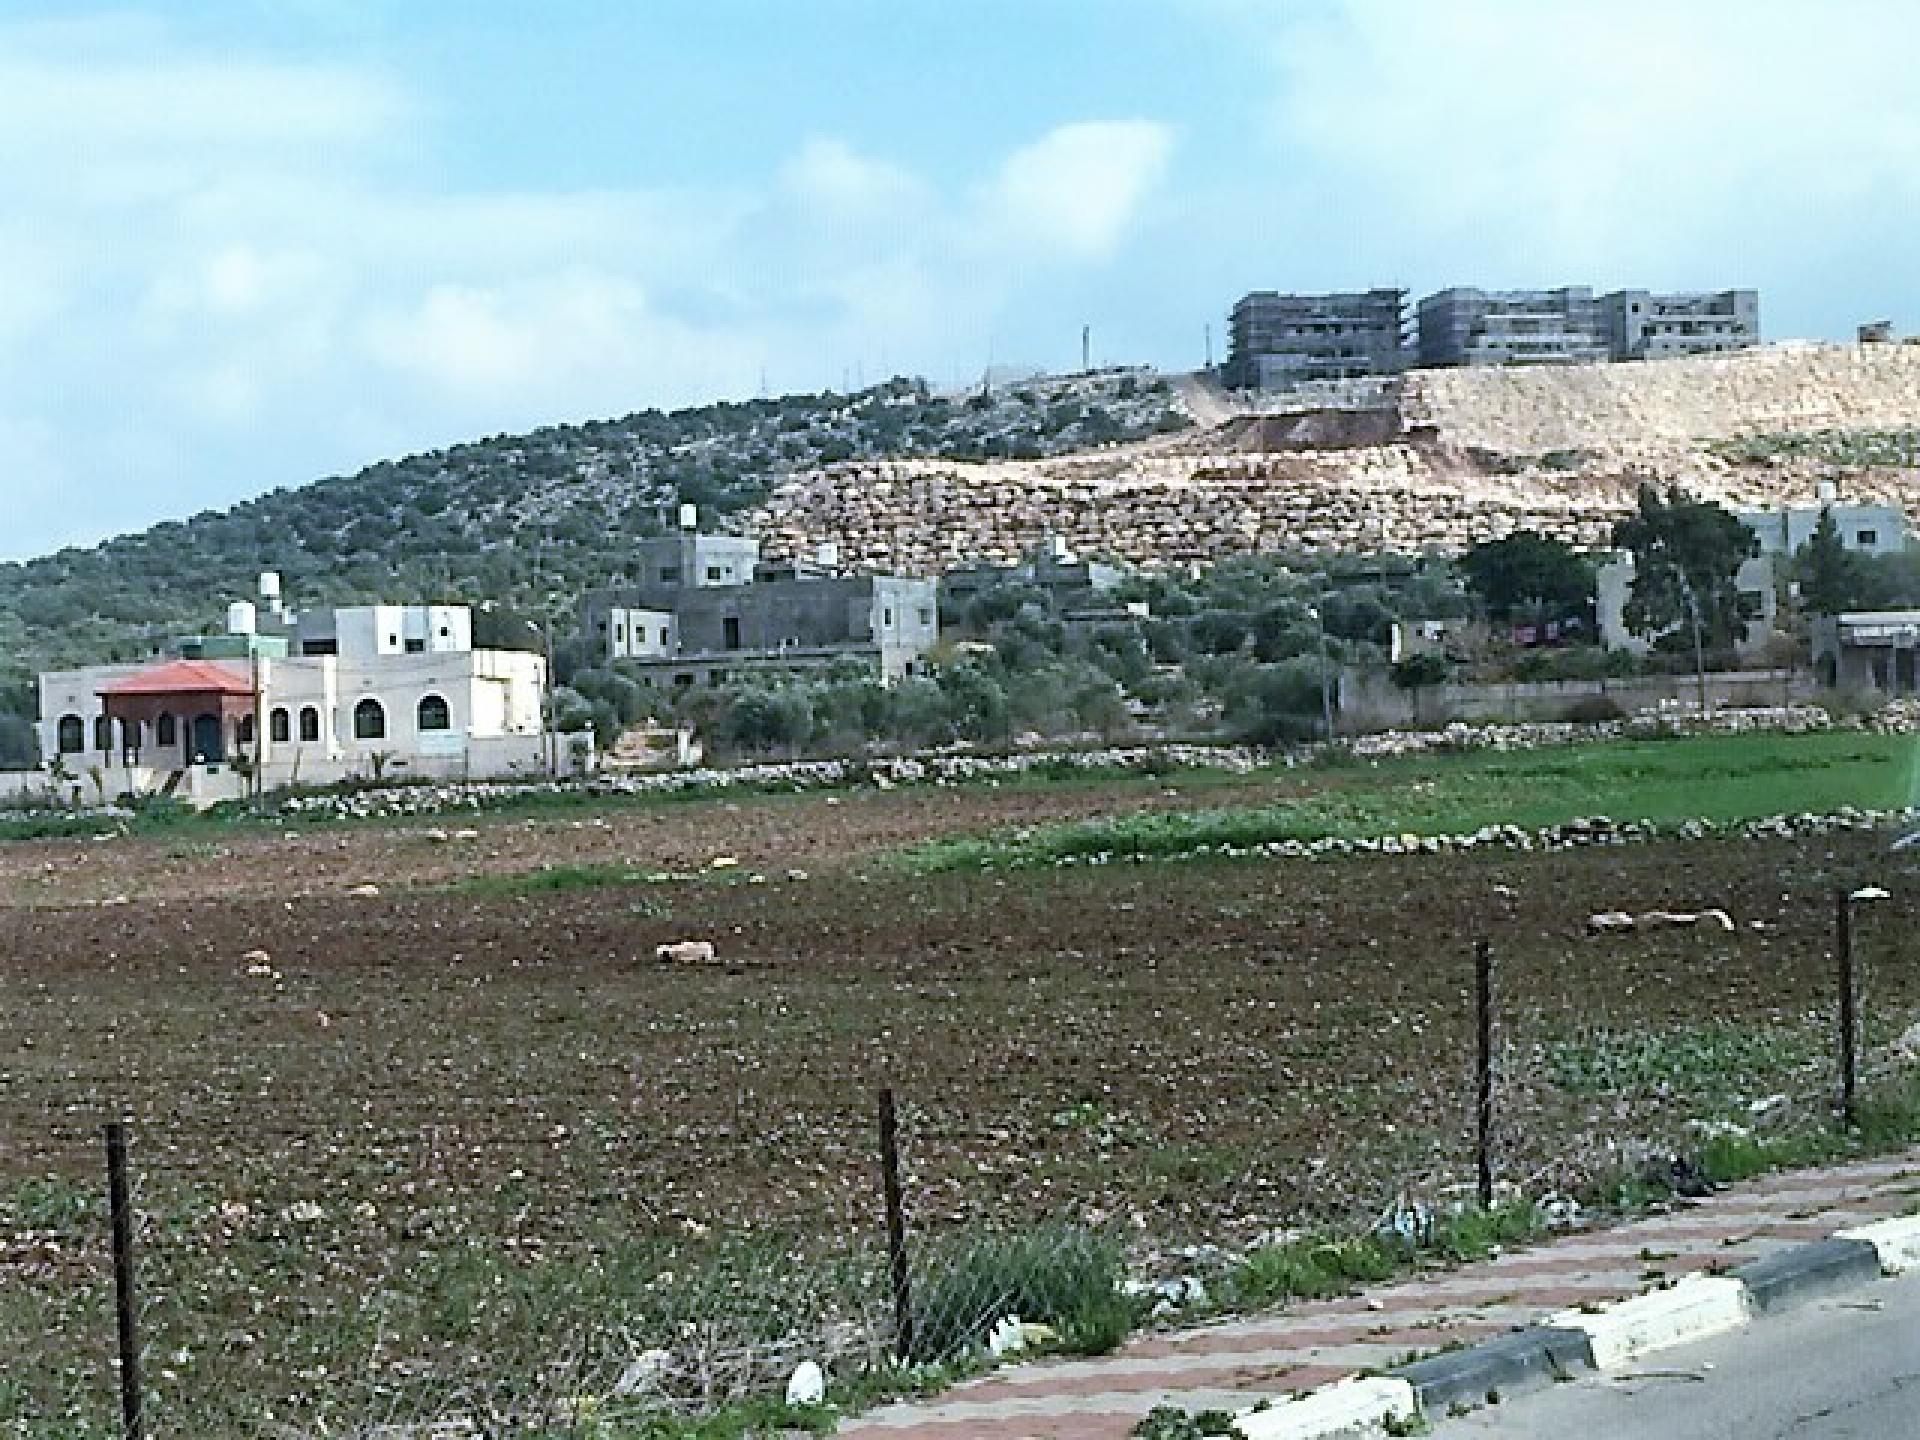 The wall abuts the village’s buildings